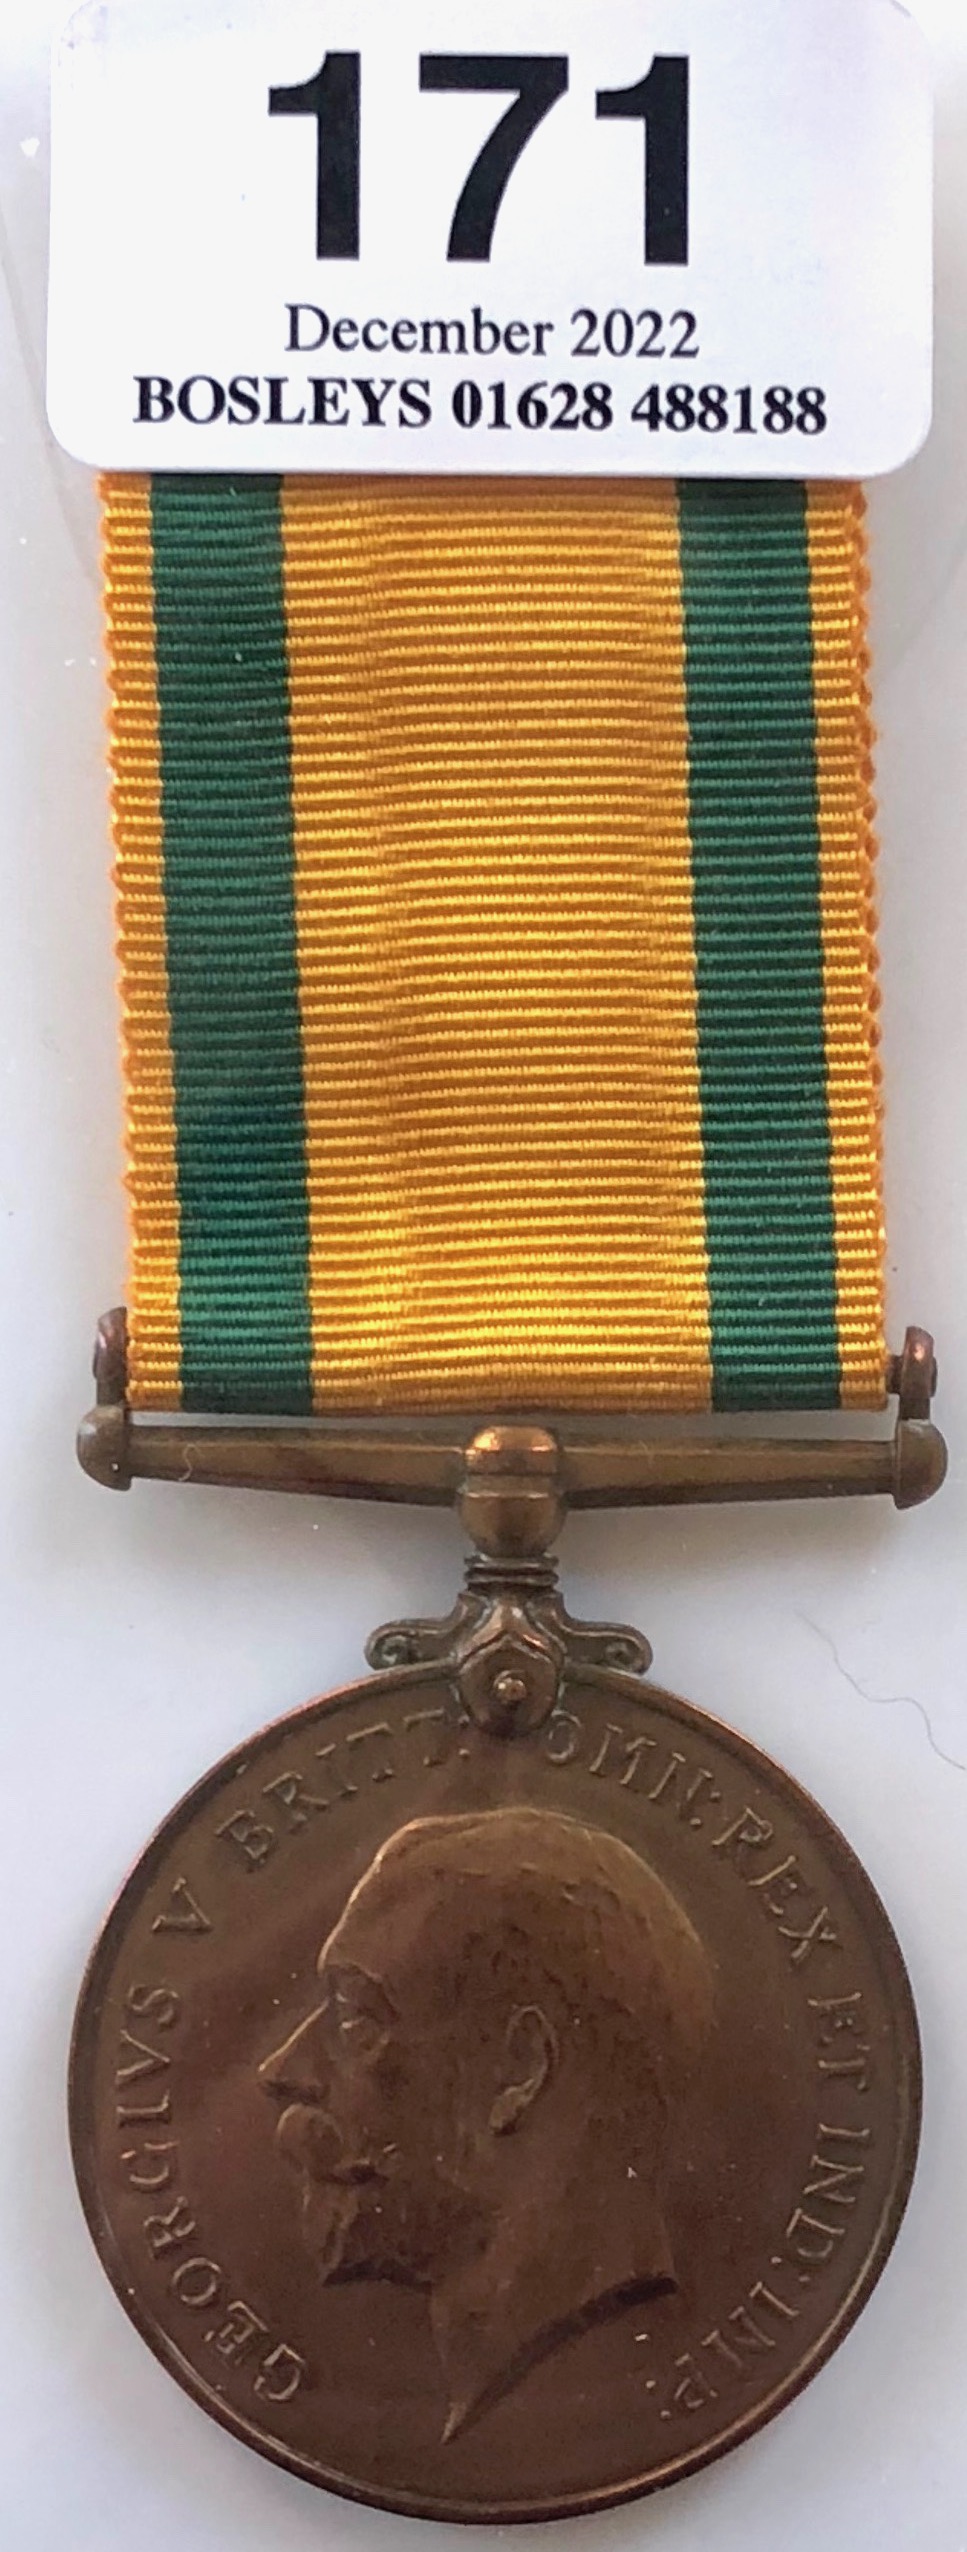 WW1 1/4th Queen’s Regiment Casualty Territorial Force War Medal Awarded to T-1366 PTE R.A. NISBET